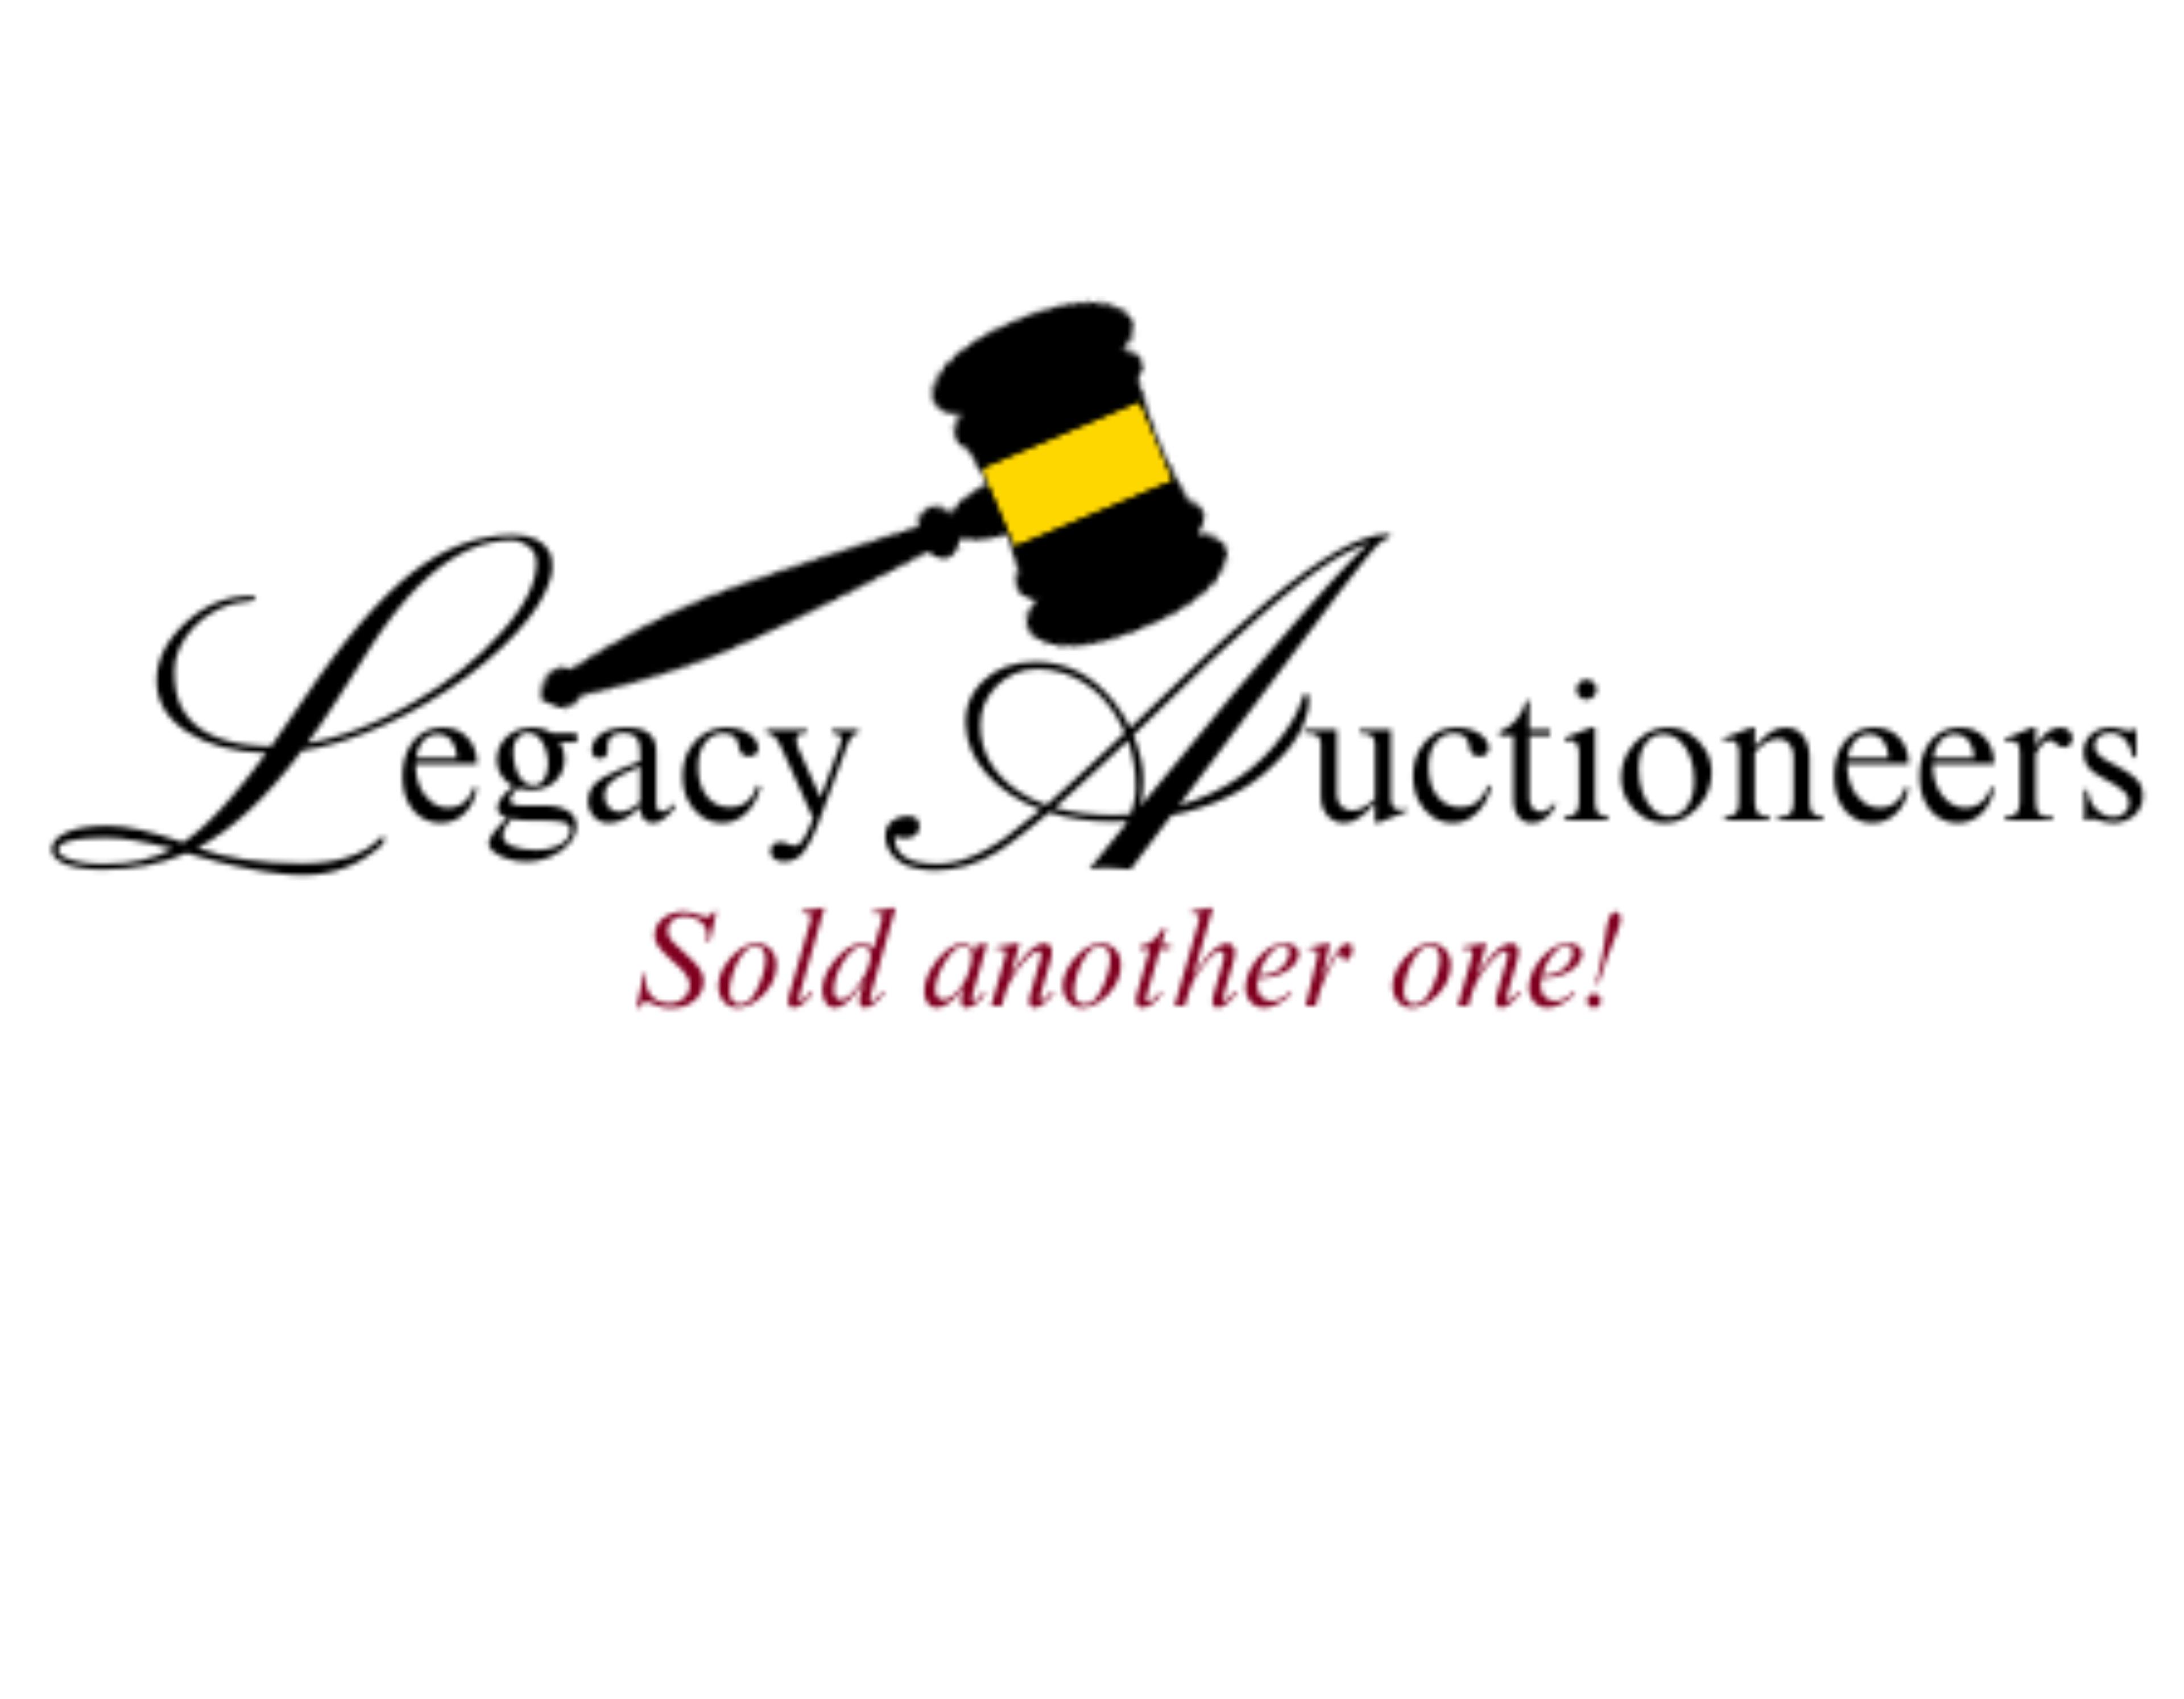 Legacy Auctioneers